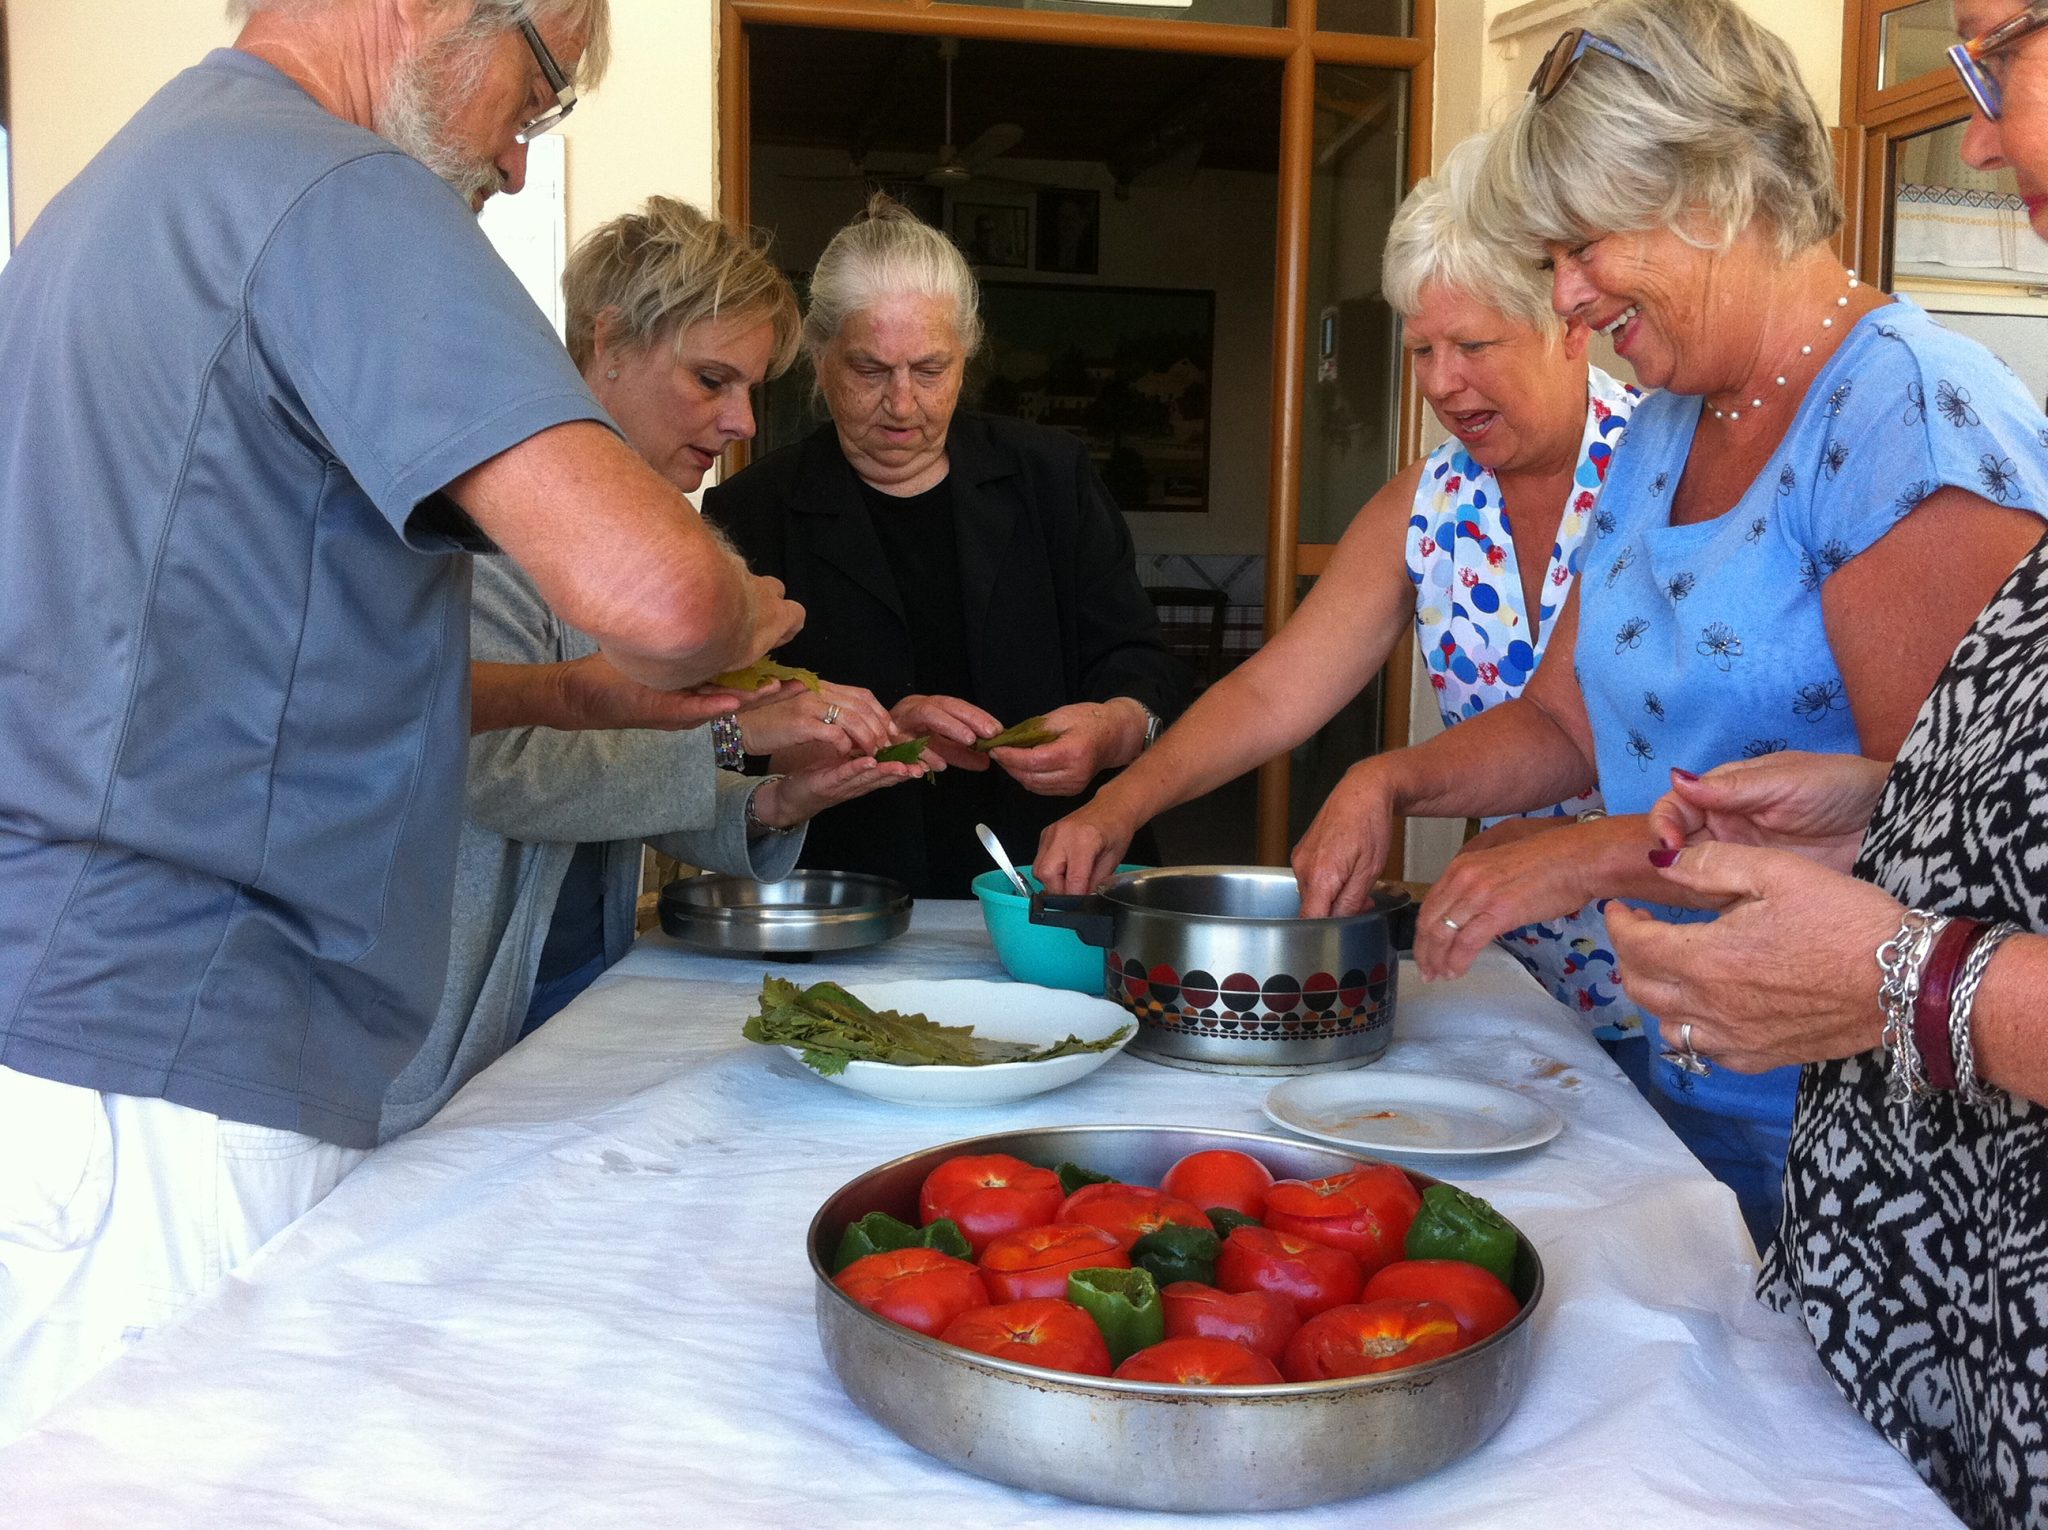 cooking lessons on Cretan traditional food and diet - Amari Rethymnon Crete